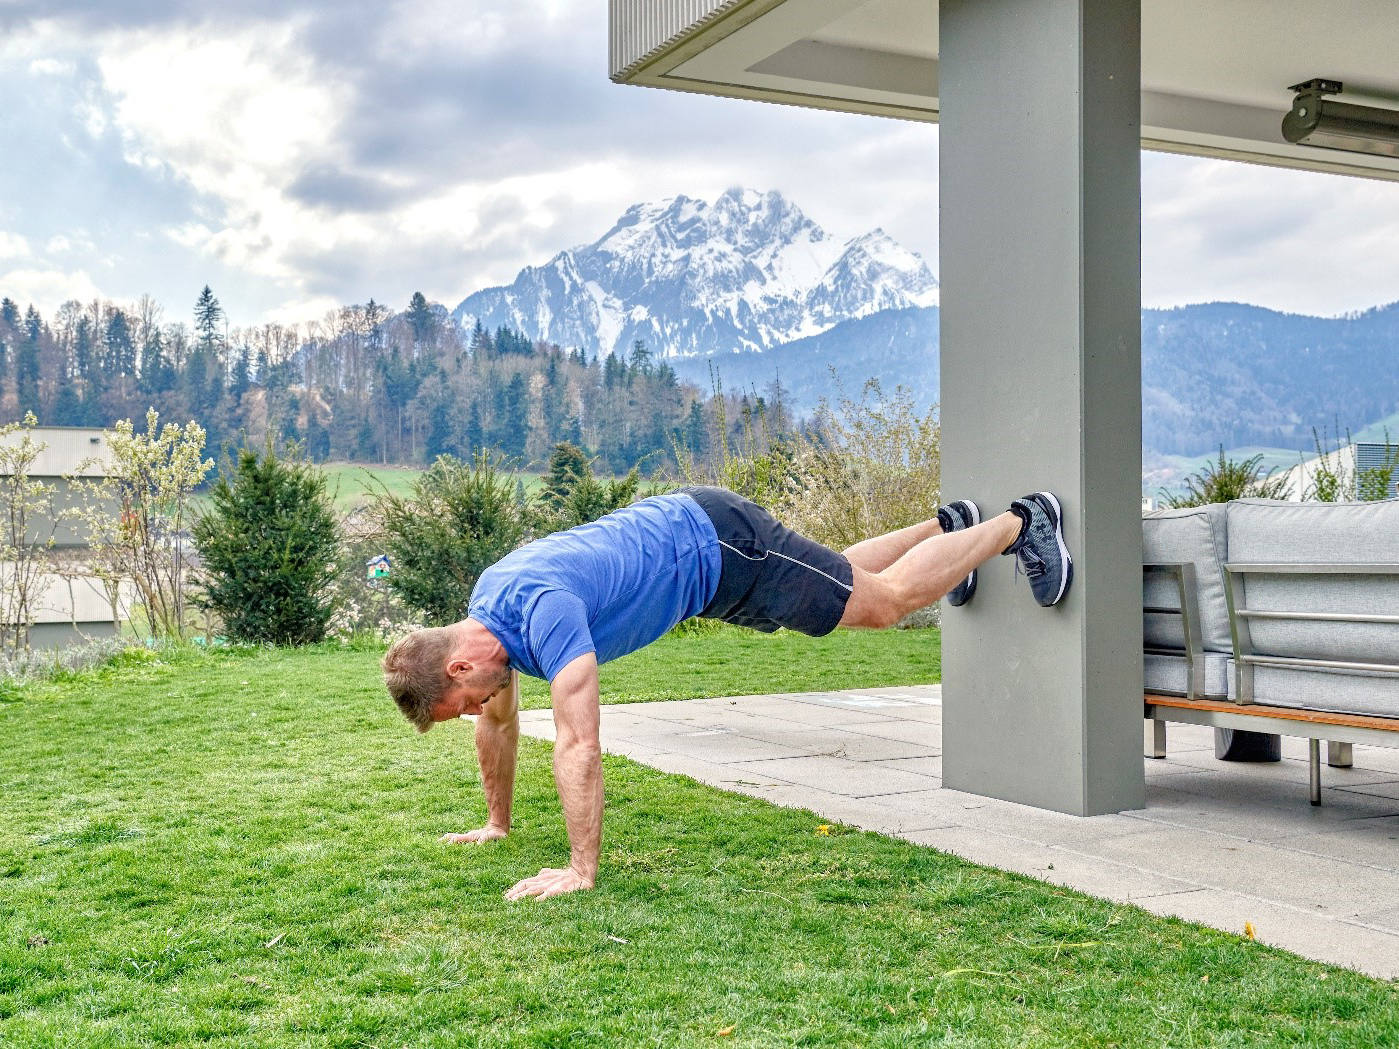 Learn to do the handstand: Exercise